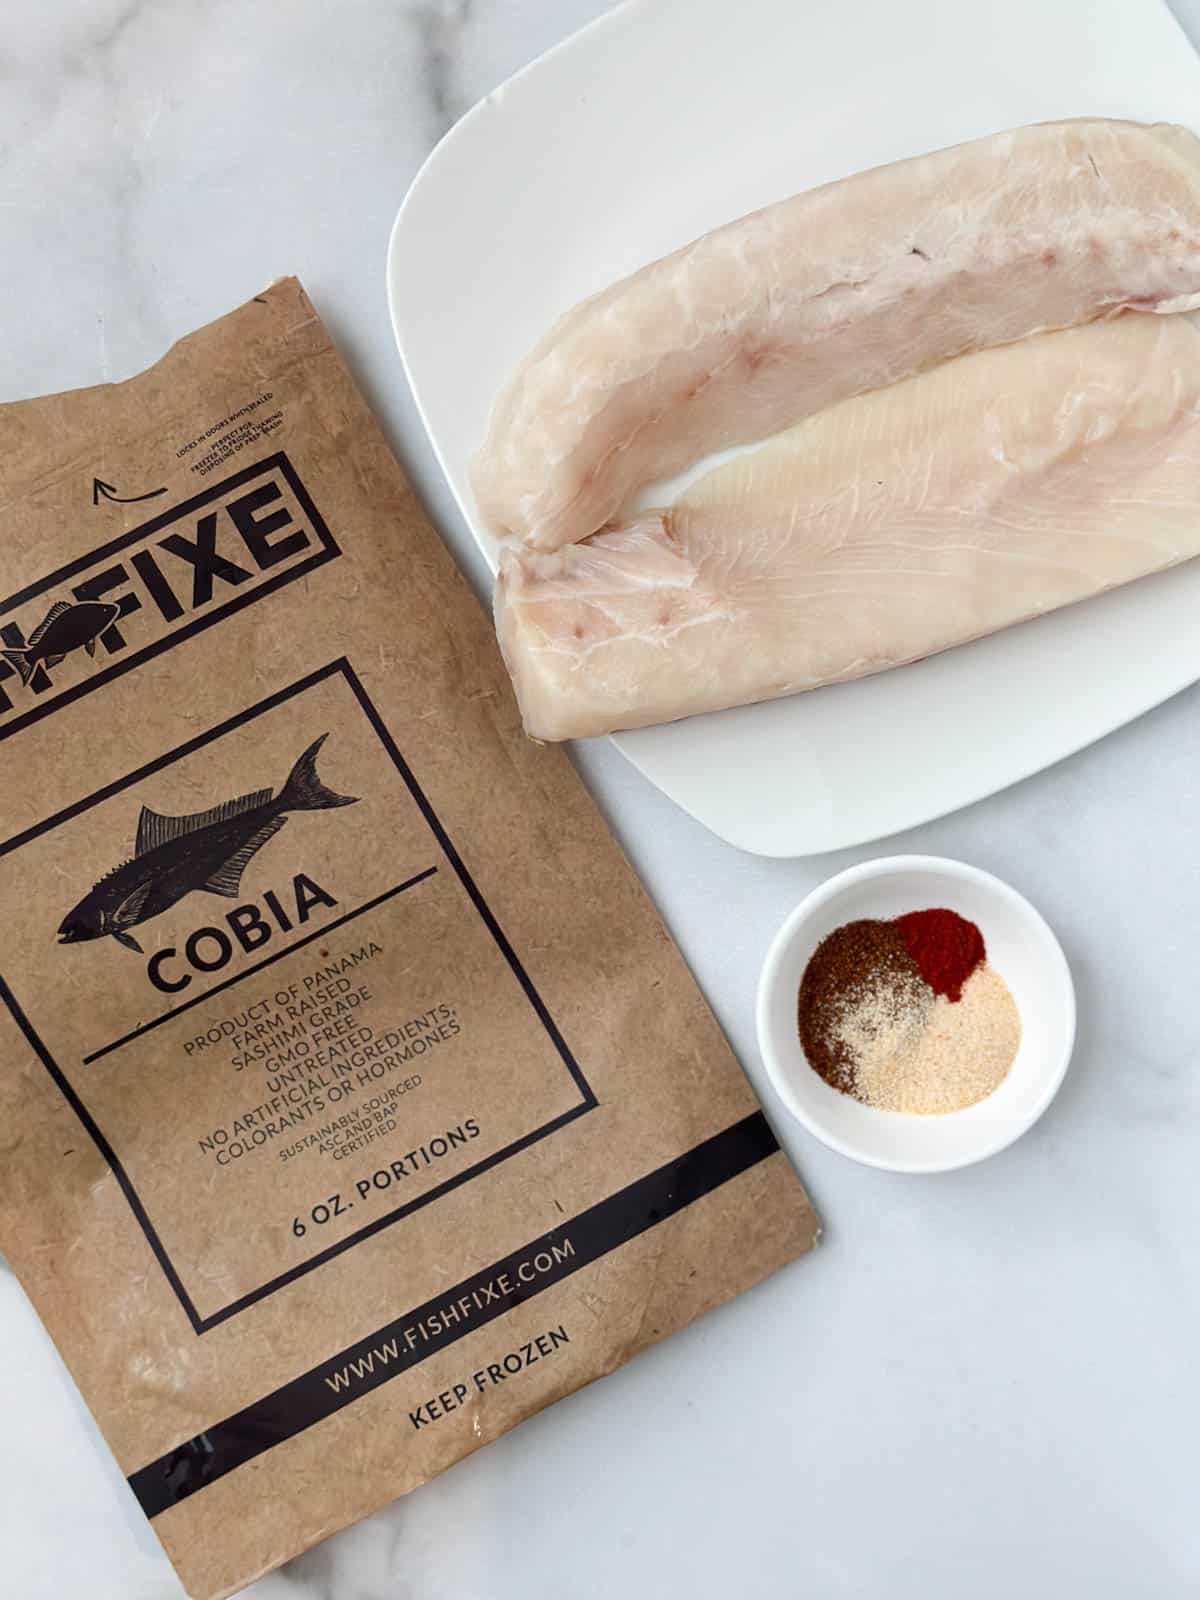 A cobia fish fixe package next to 2 fish fillets and a blackening seasoning.